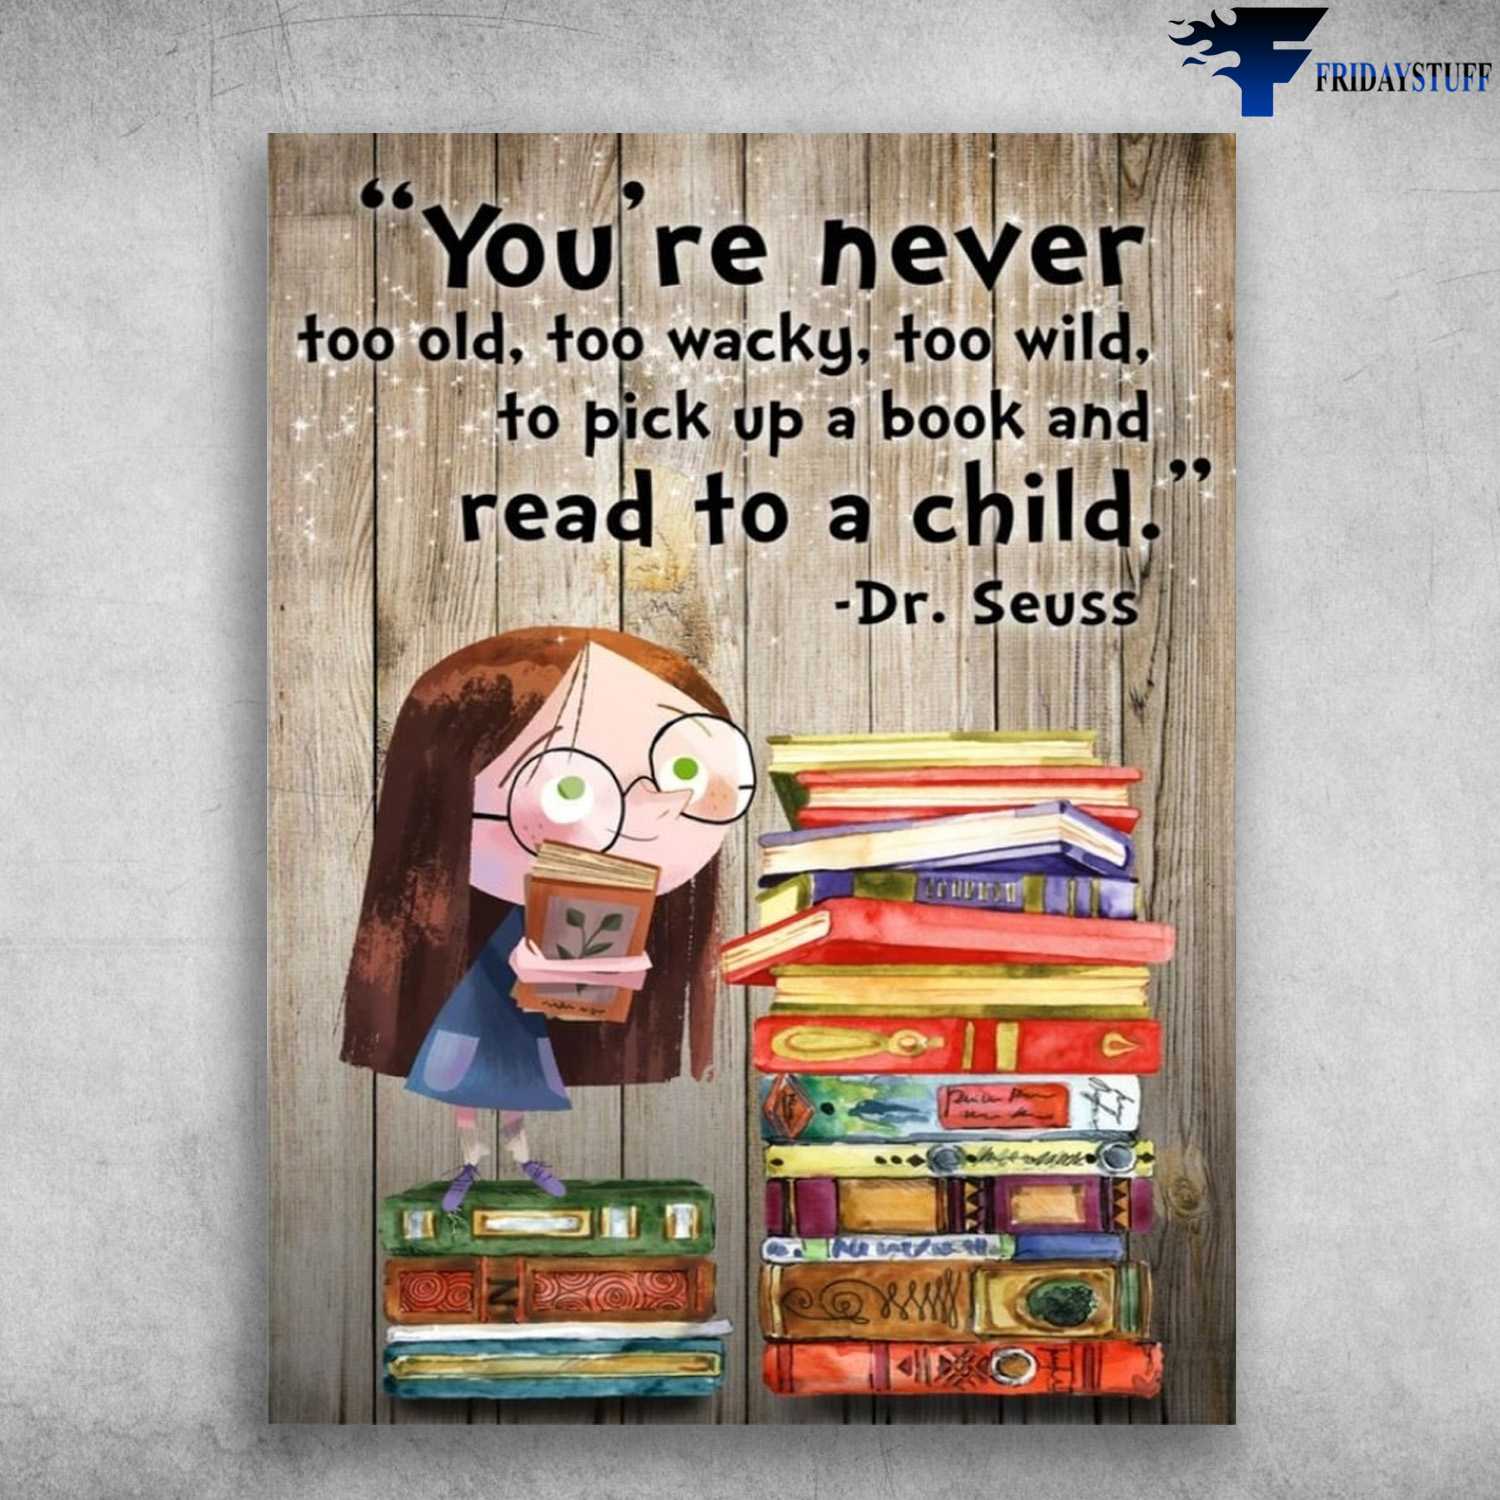 Book Lover, Books Reading - You're Never Too Old, Too Wacky, To Wild, To Pick Up Book And Read To A Child